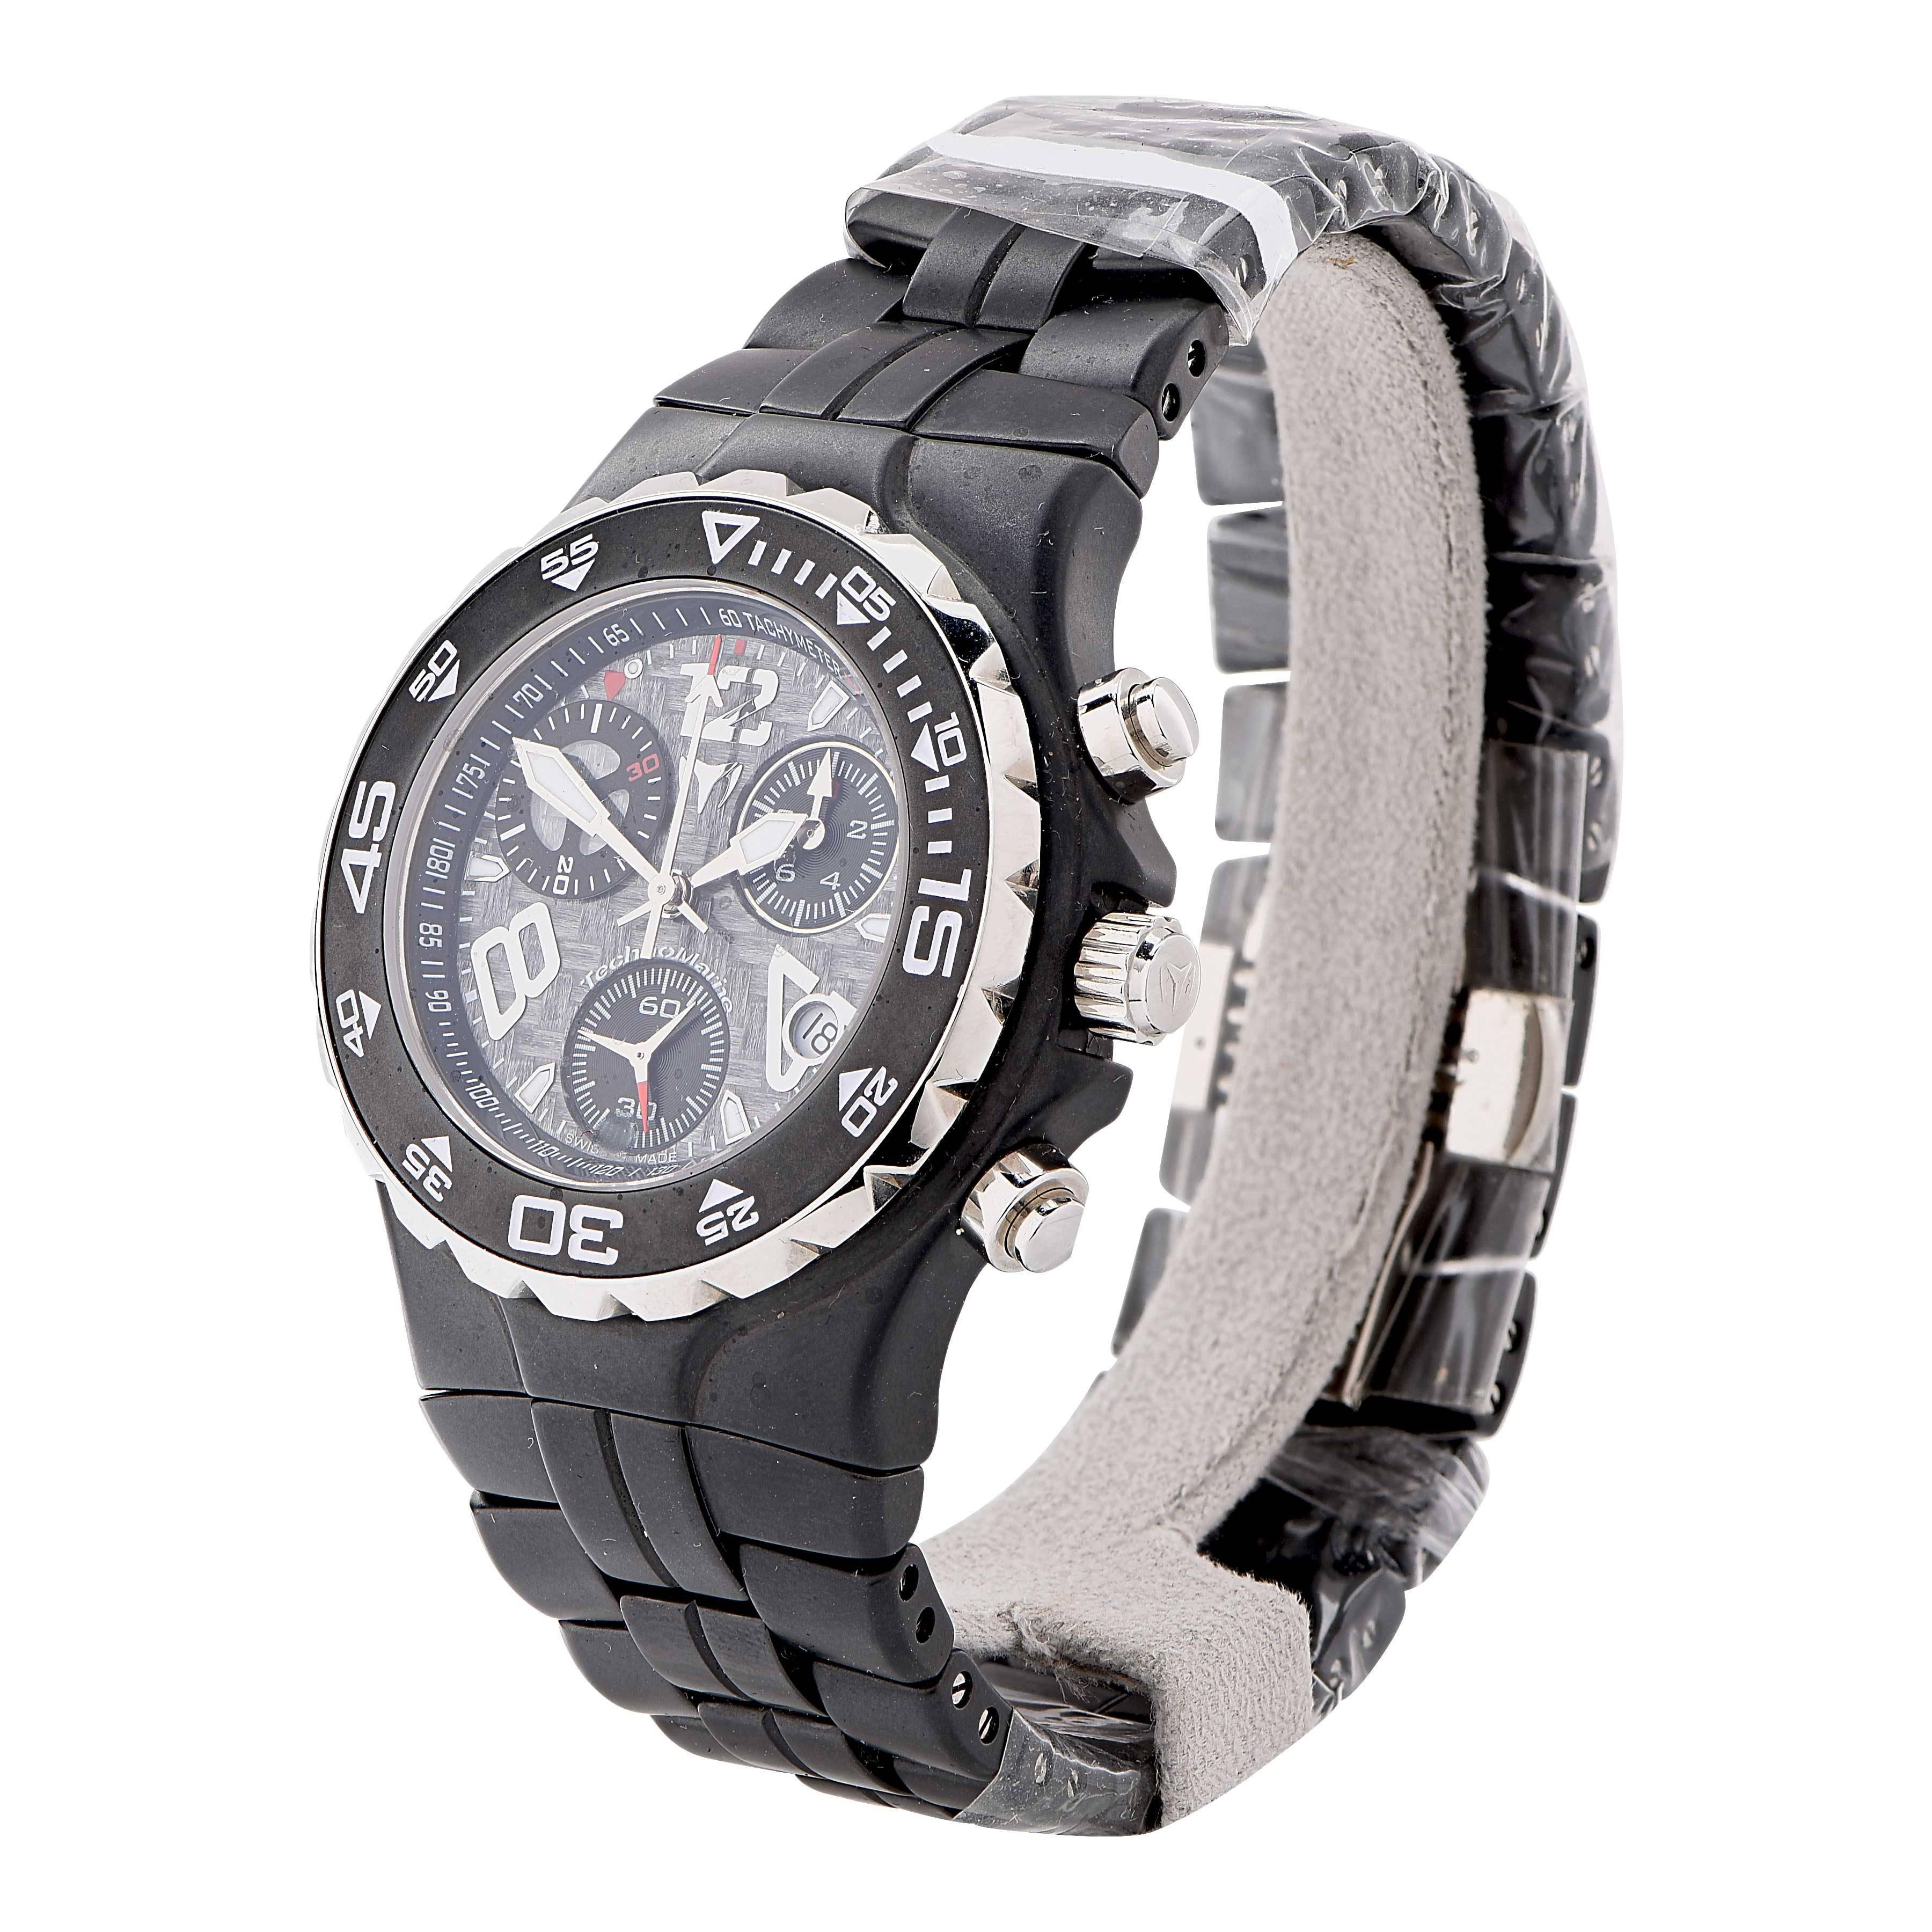 Technomarine TMY Ceramic Bezel 42mm Stainless Steel
Model TMYCB02CM Retail Price $2,250.00
New In Box with Papers